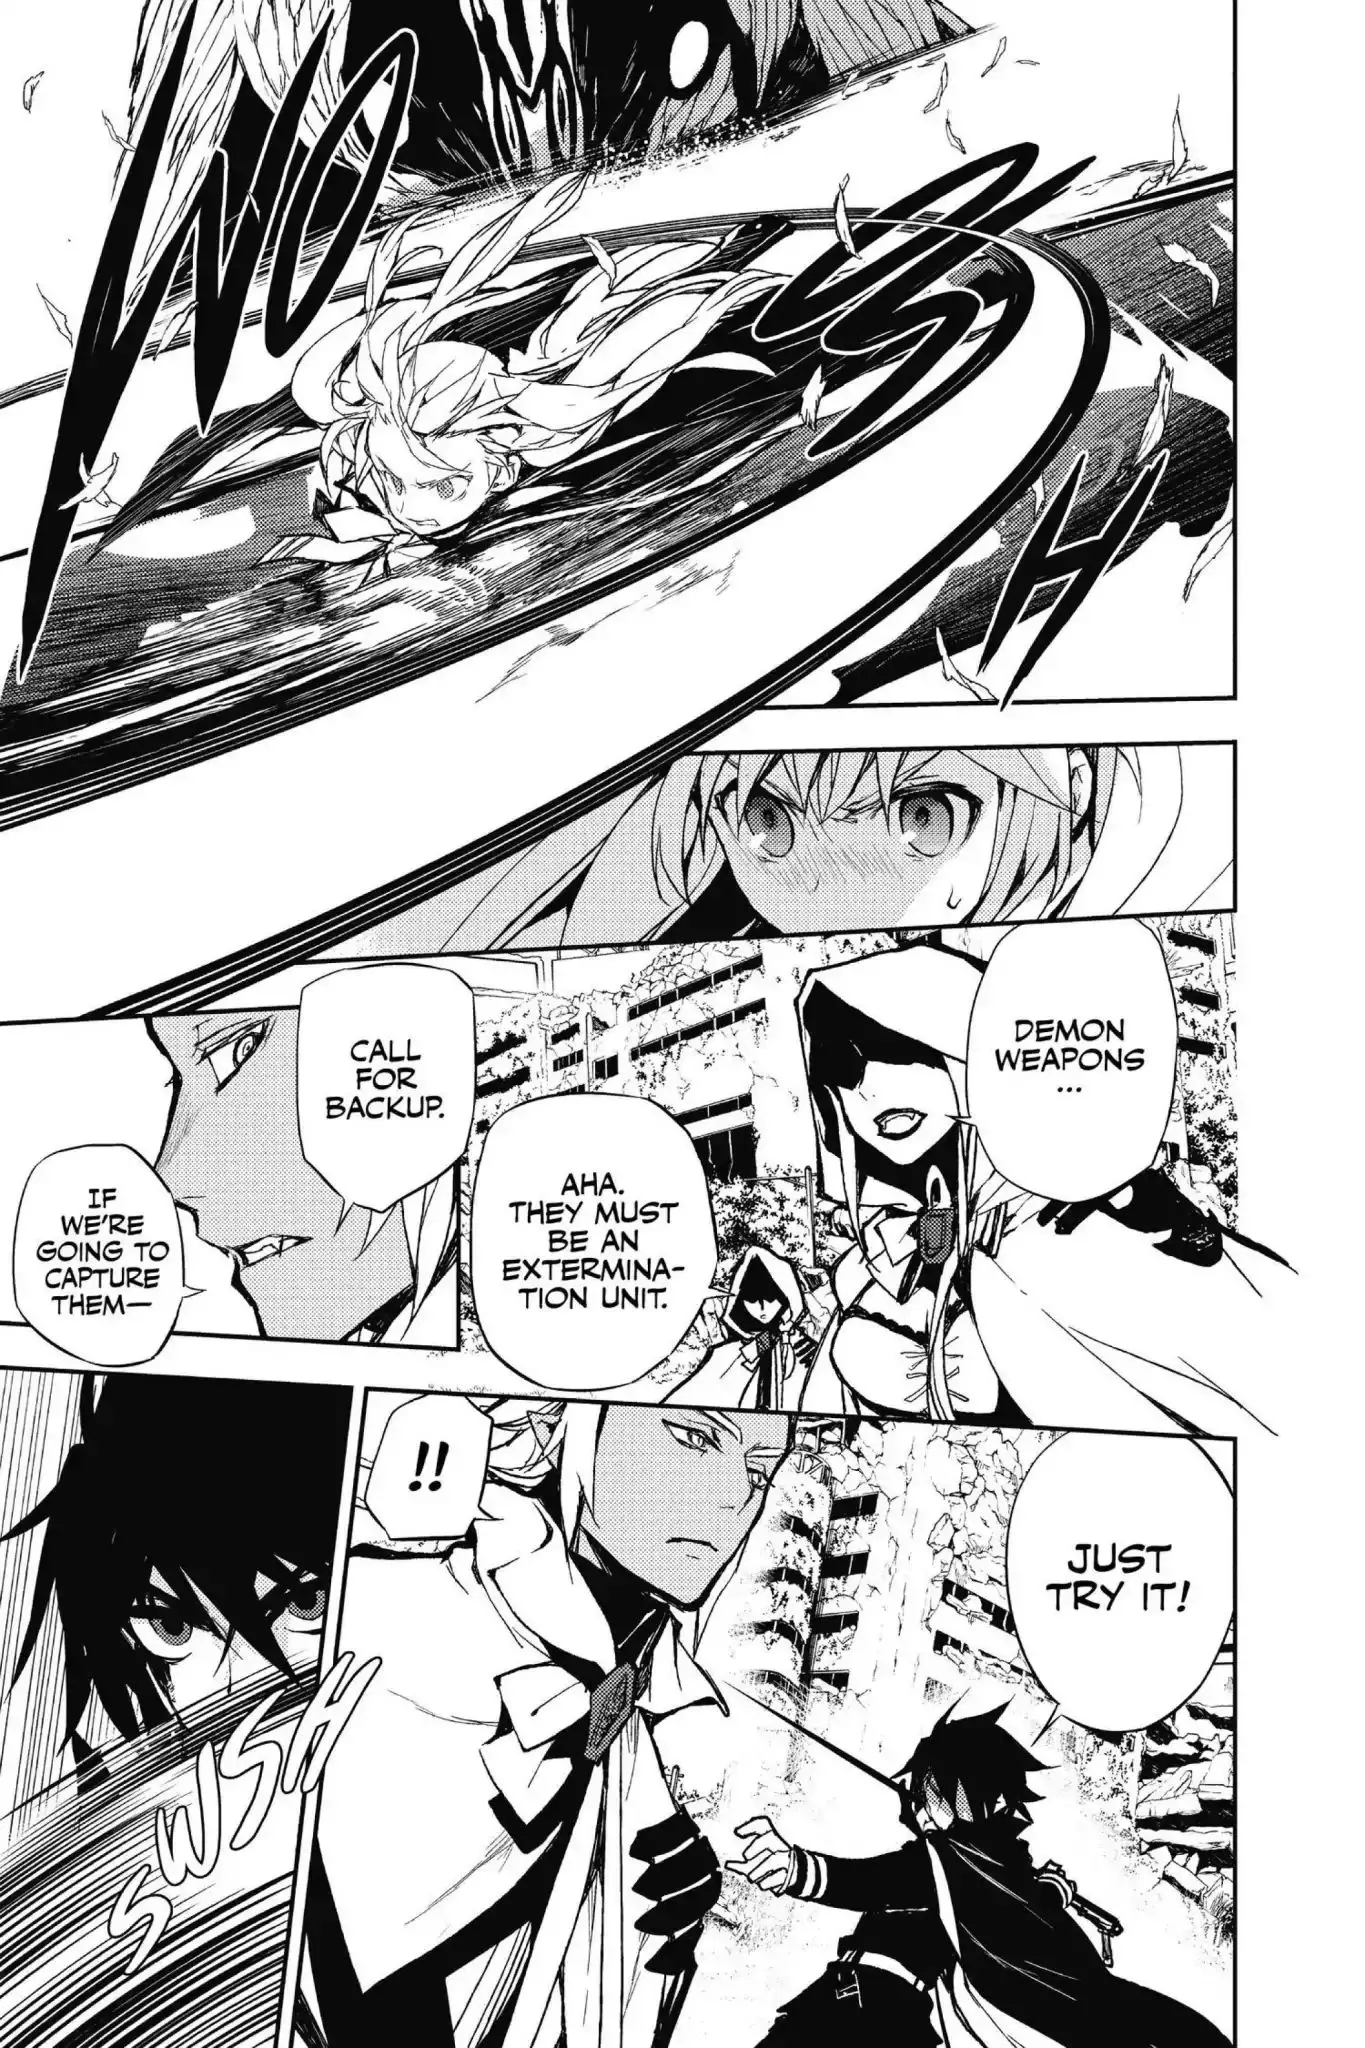 Seraph Of The End - 8 page 40-4daa161d